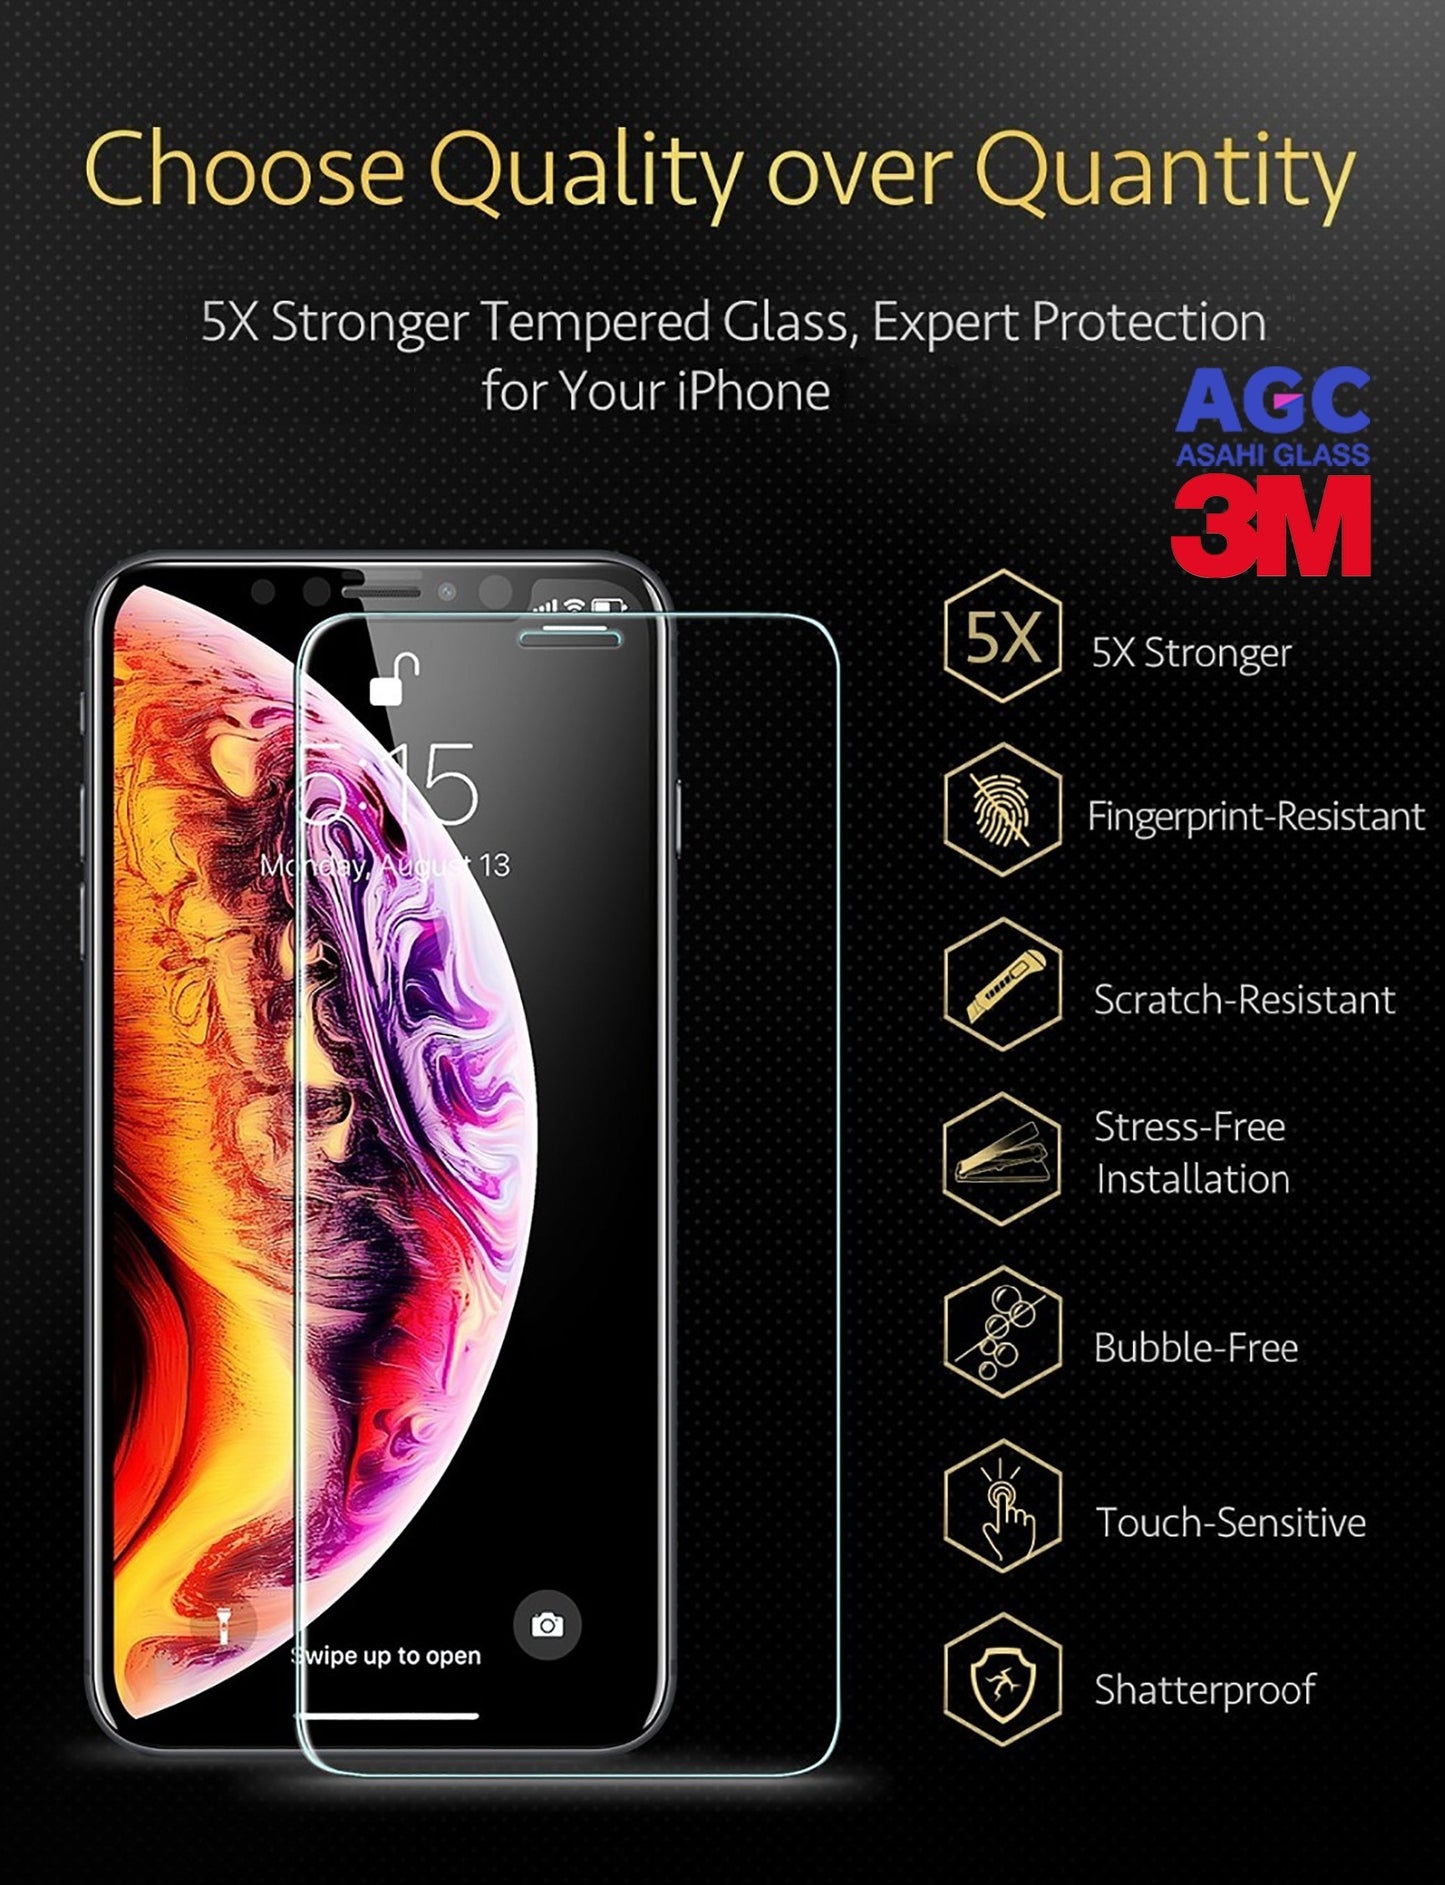 vaku-tempered-glass-2-5d-for-iphone-7-8-6s-clear-3m-quality8905129004255